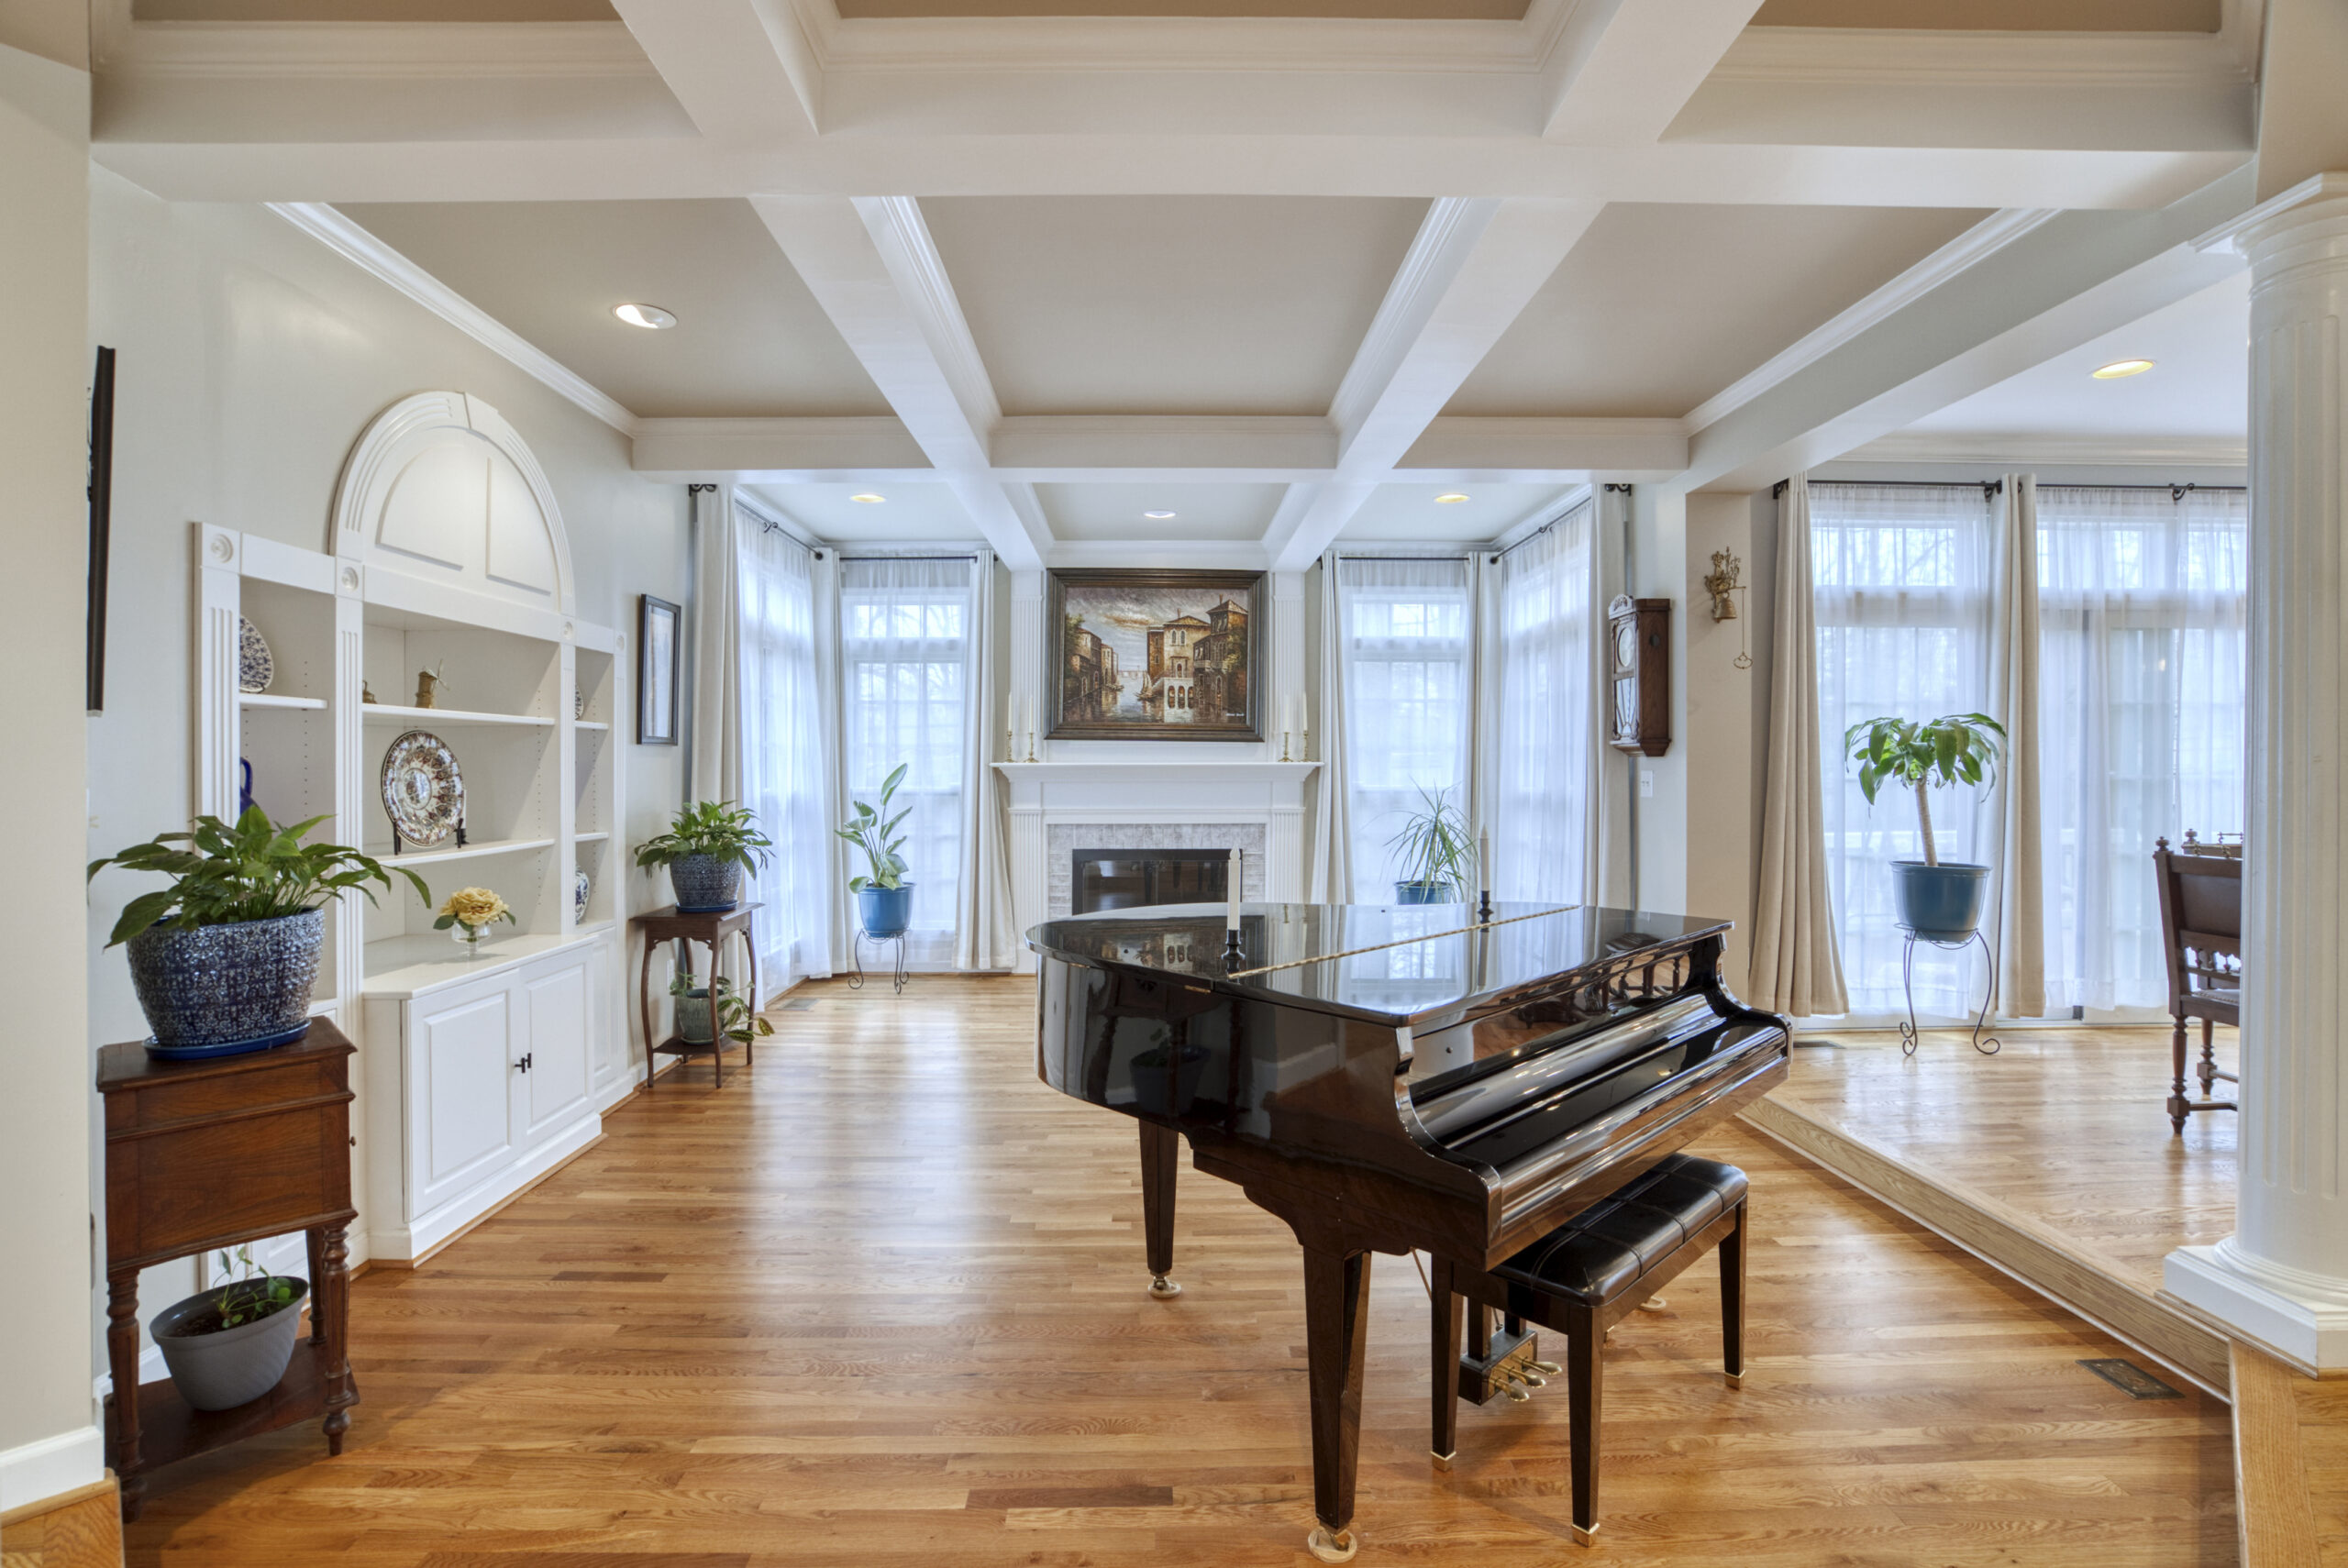 Professional interior photo of 9701 Chilcott Manor Way - showing the piano room/conservatory with built in shelves and coffered ceiling